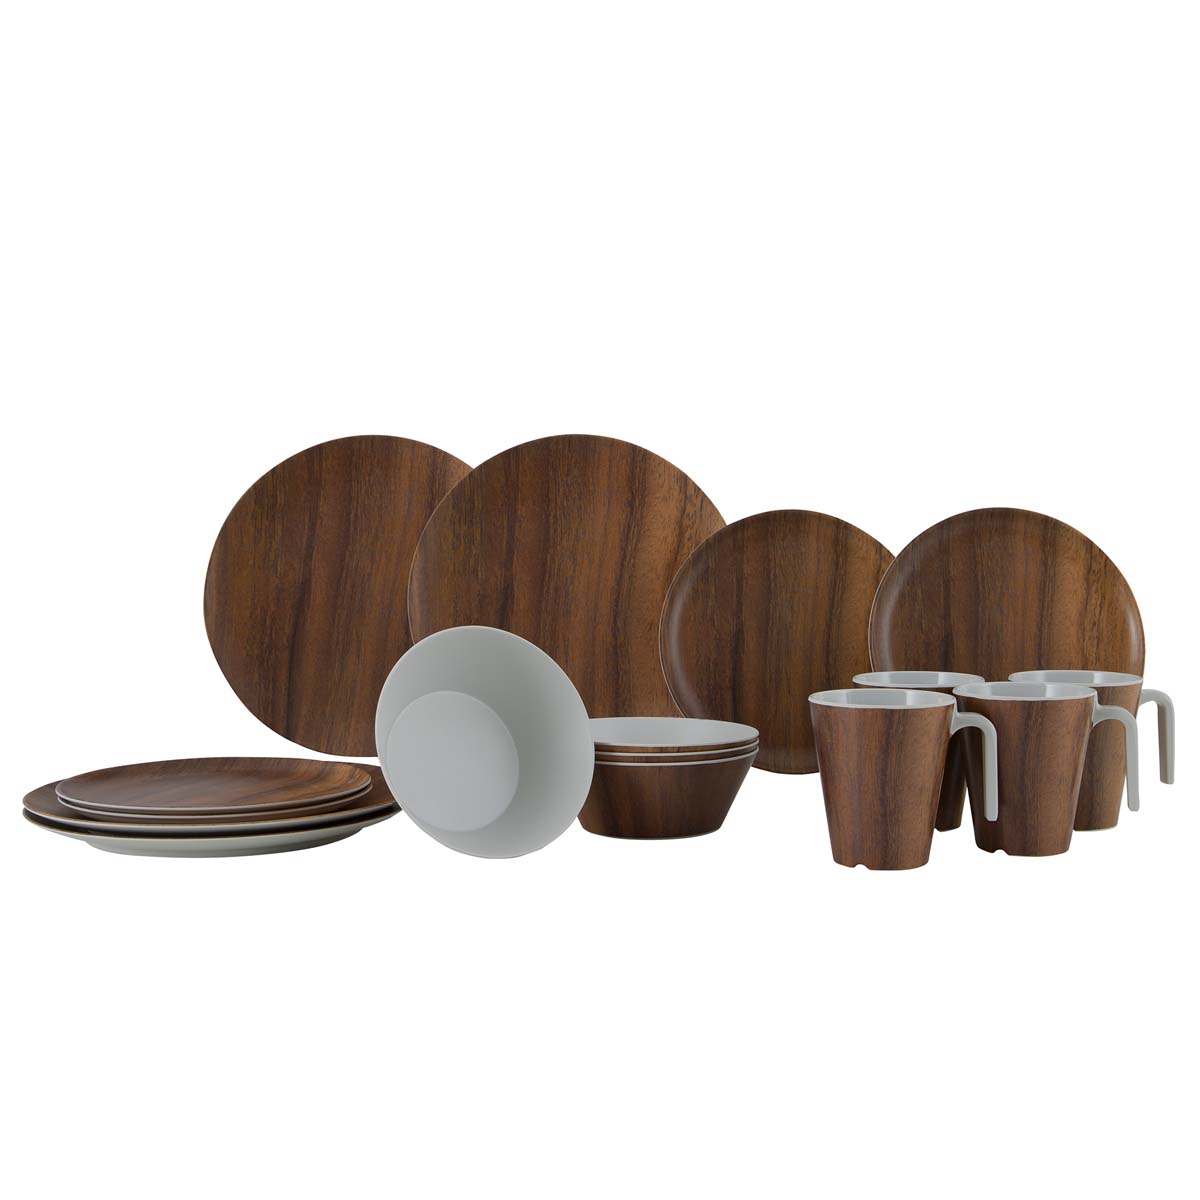 6913100 A stylish wood-colored tableware set from the Nature line collection. 100% high quality melamine, virtually unbreakable and scratch resistant. The set consists of 16 pieces. The tableware is soundproof and hygienic due to the replaceable non-slip solution. In addition, the tableware set comes with a handy and luxurious dust bag. Ideal for camping, at home or on the boat. Moreover, the dinnerware is lightweight, suitable for the dishwasher and food approved. Dimensions: Dinner plate Ø 25 cm, breakfast plate Ø 20.5 cm, bowl Ø 14 cm, mug 350 ml.